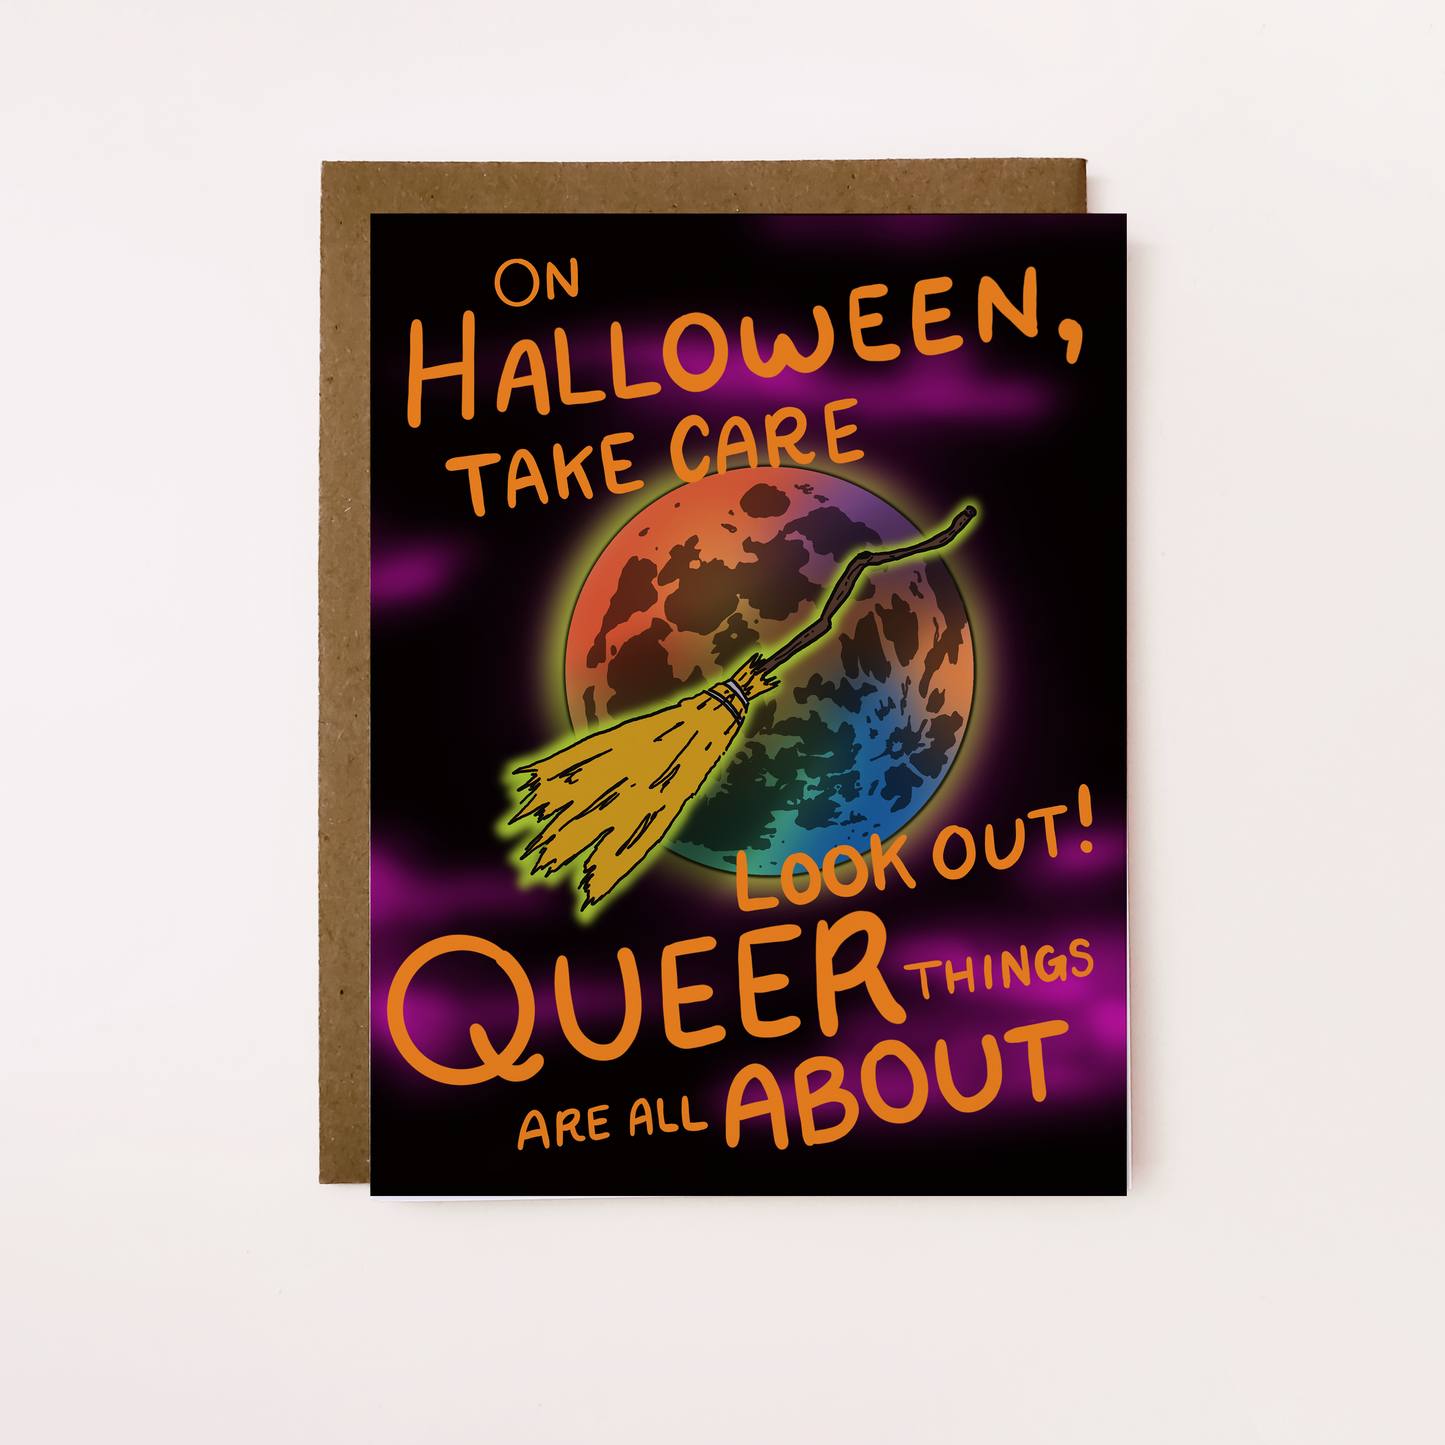 Queer Things Are All About Card